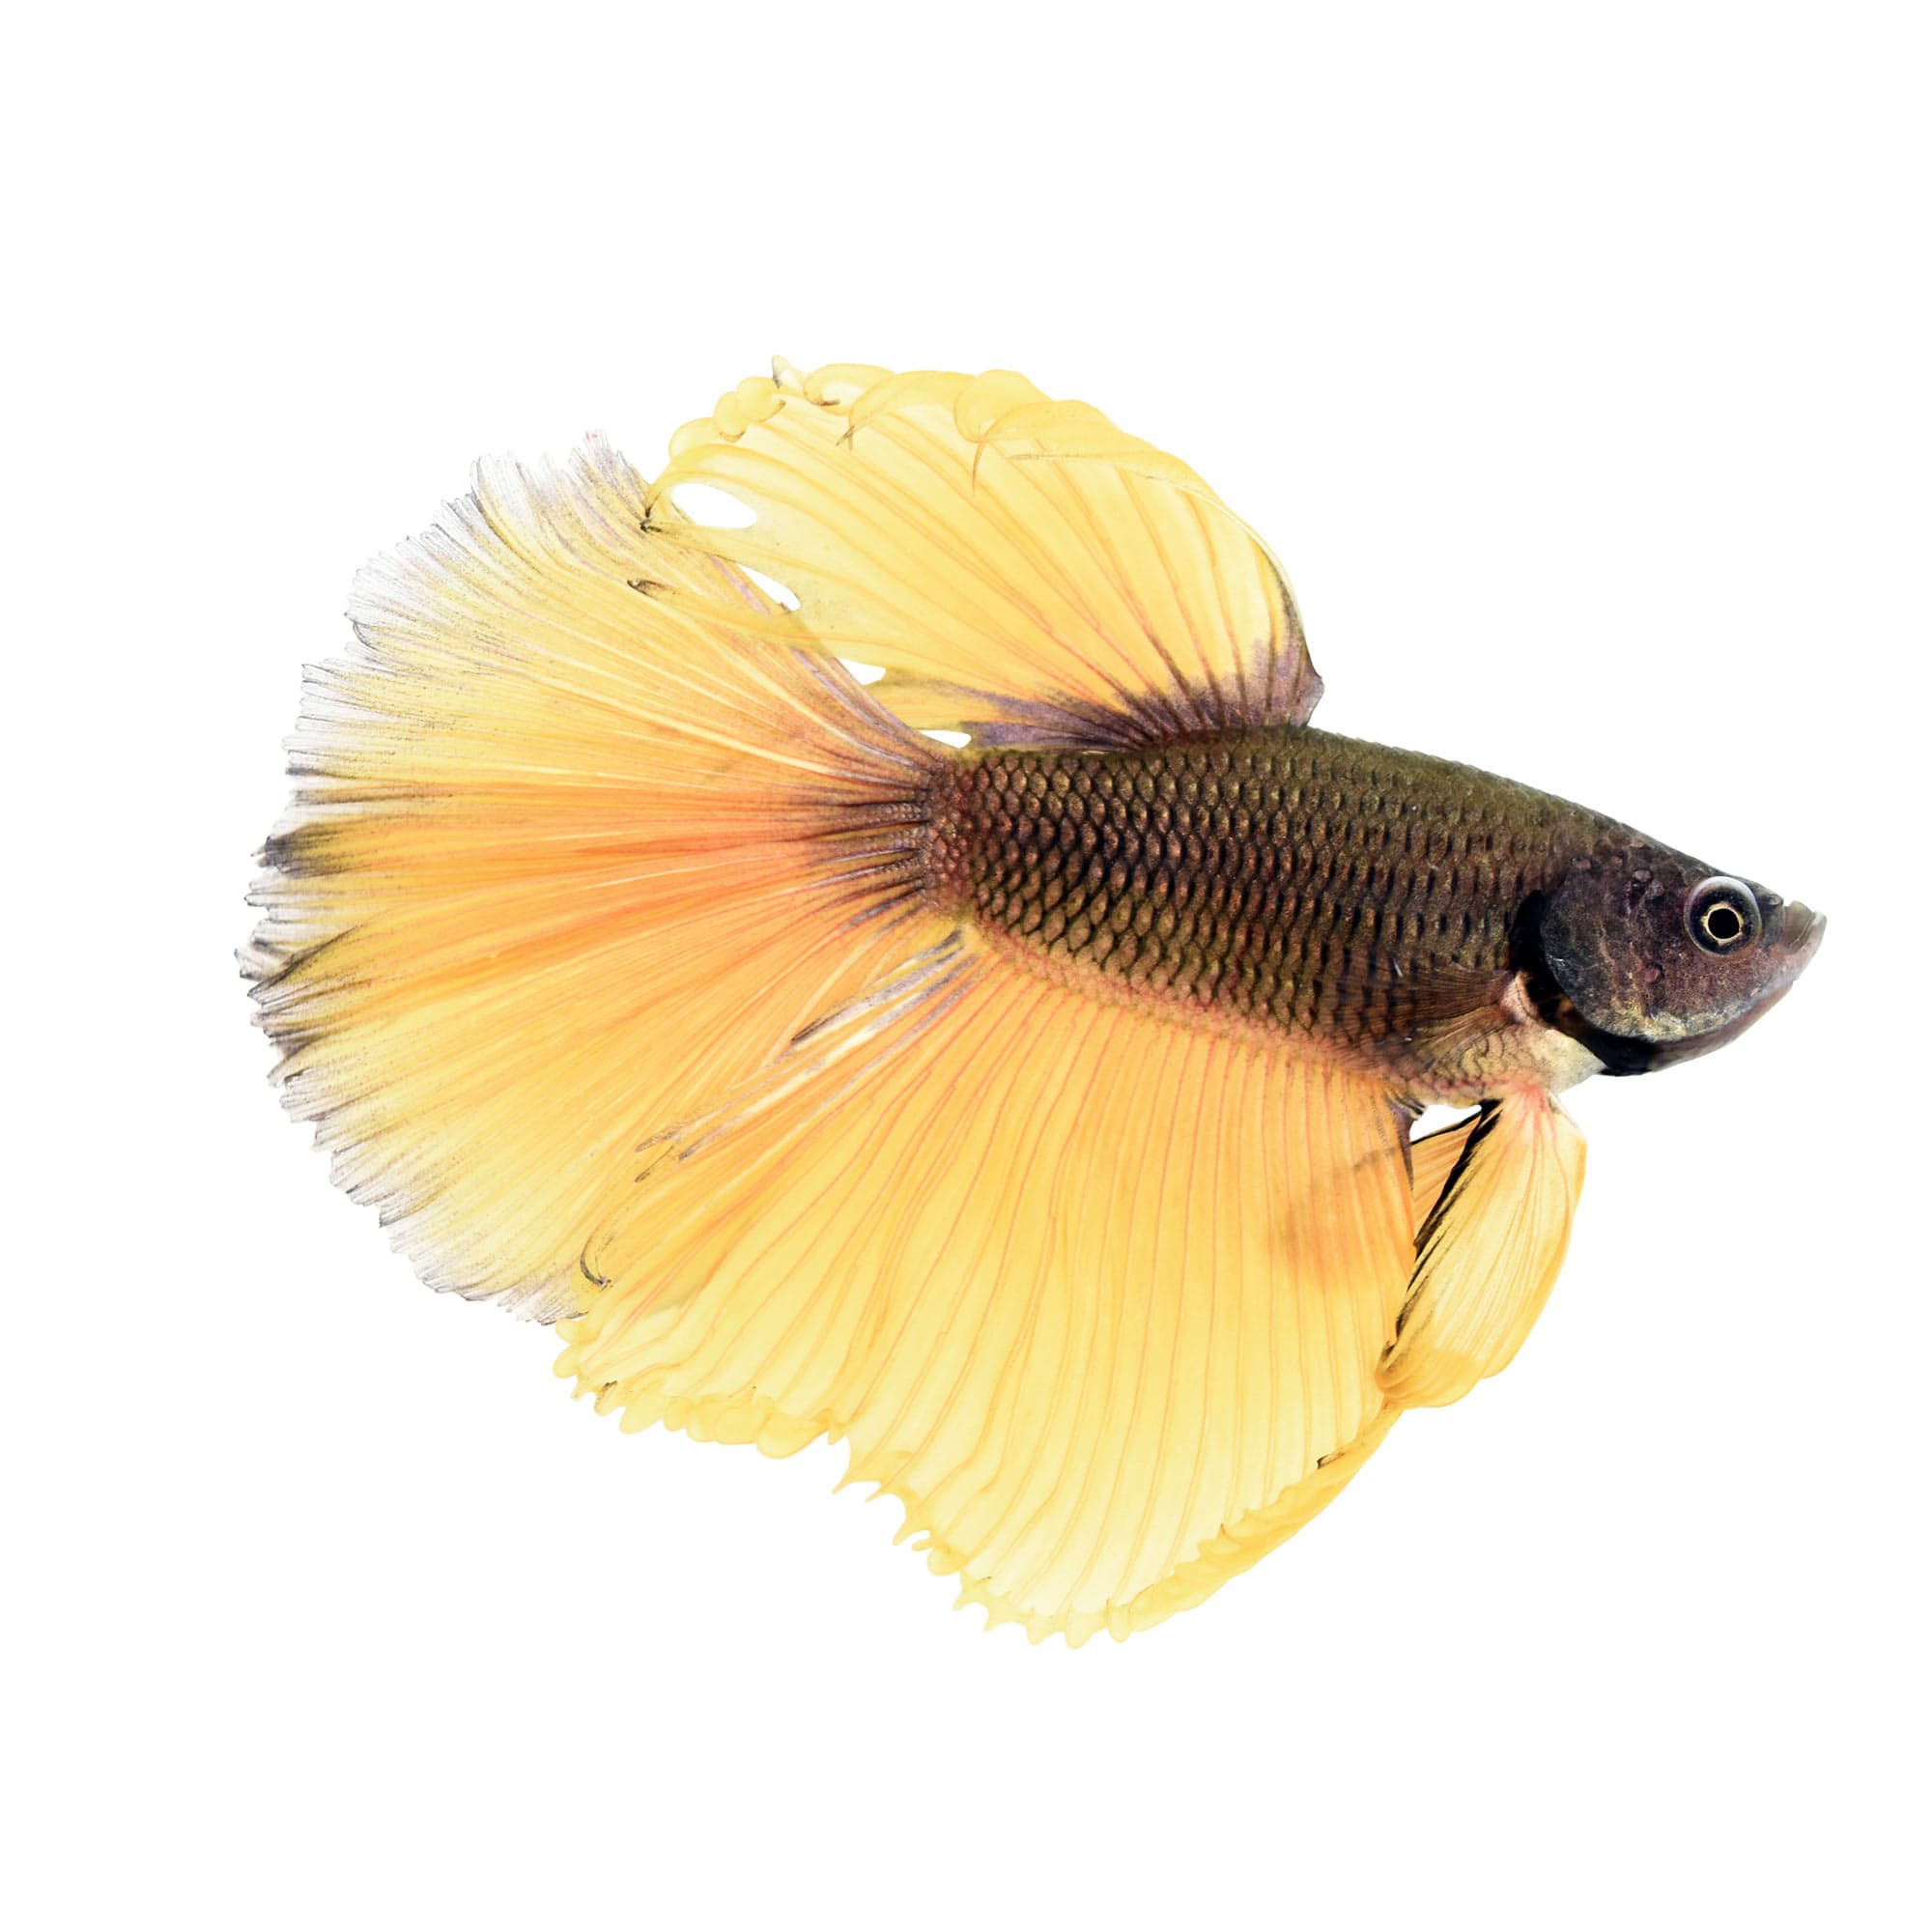 The Adorable and Vibrant Bumblebee Betta Fish